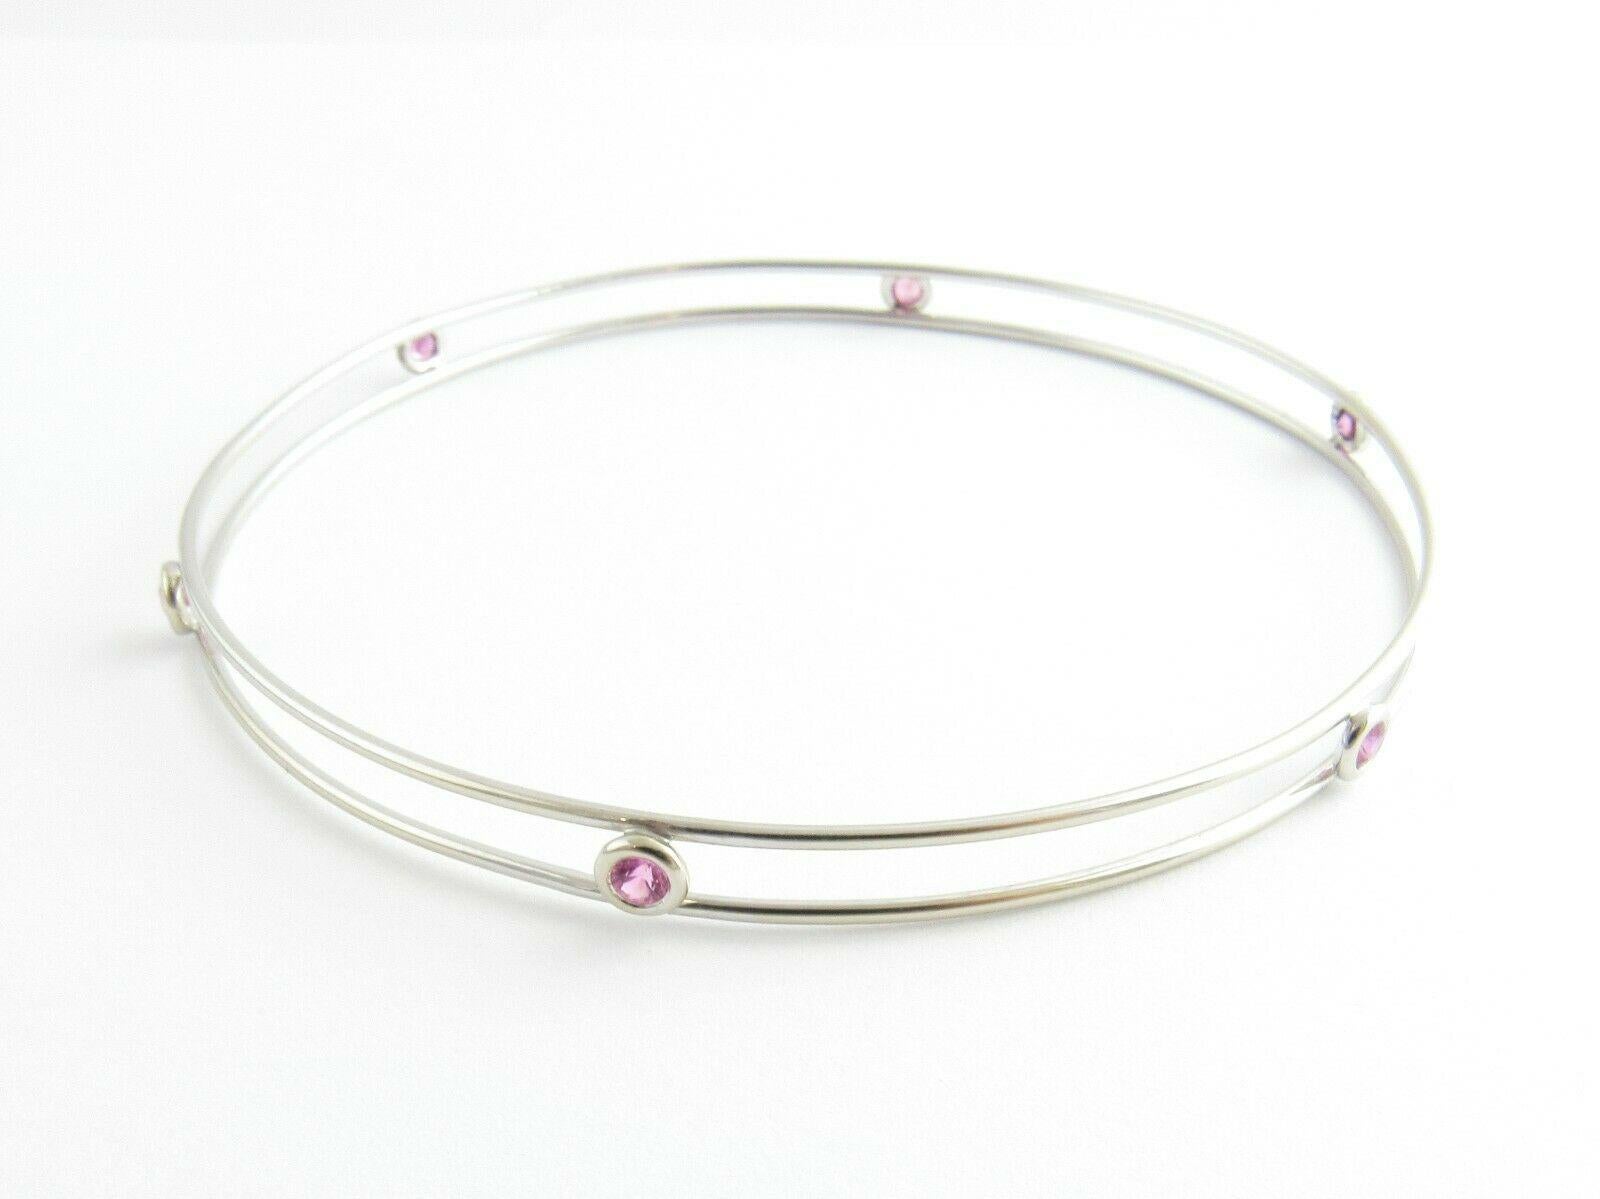 Tiffany & Co. Elsa Peretti Platinum Pink Sapphire By The Yard Bangle Bracelet

This authentic Tiffany & Co. bracelet is from the By the Yard collection.

Six pink sapphires are bezel set between two platinum wire circles.

Bracelet is approx. 8.5